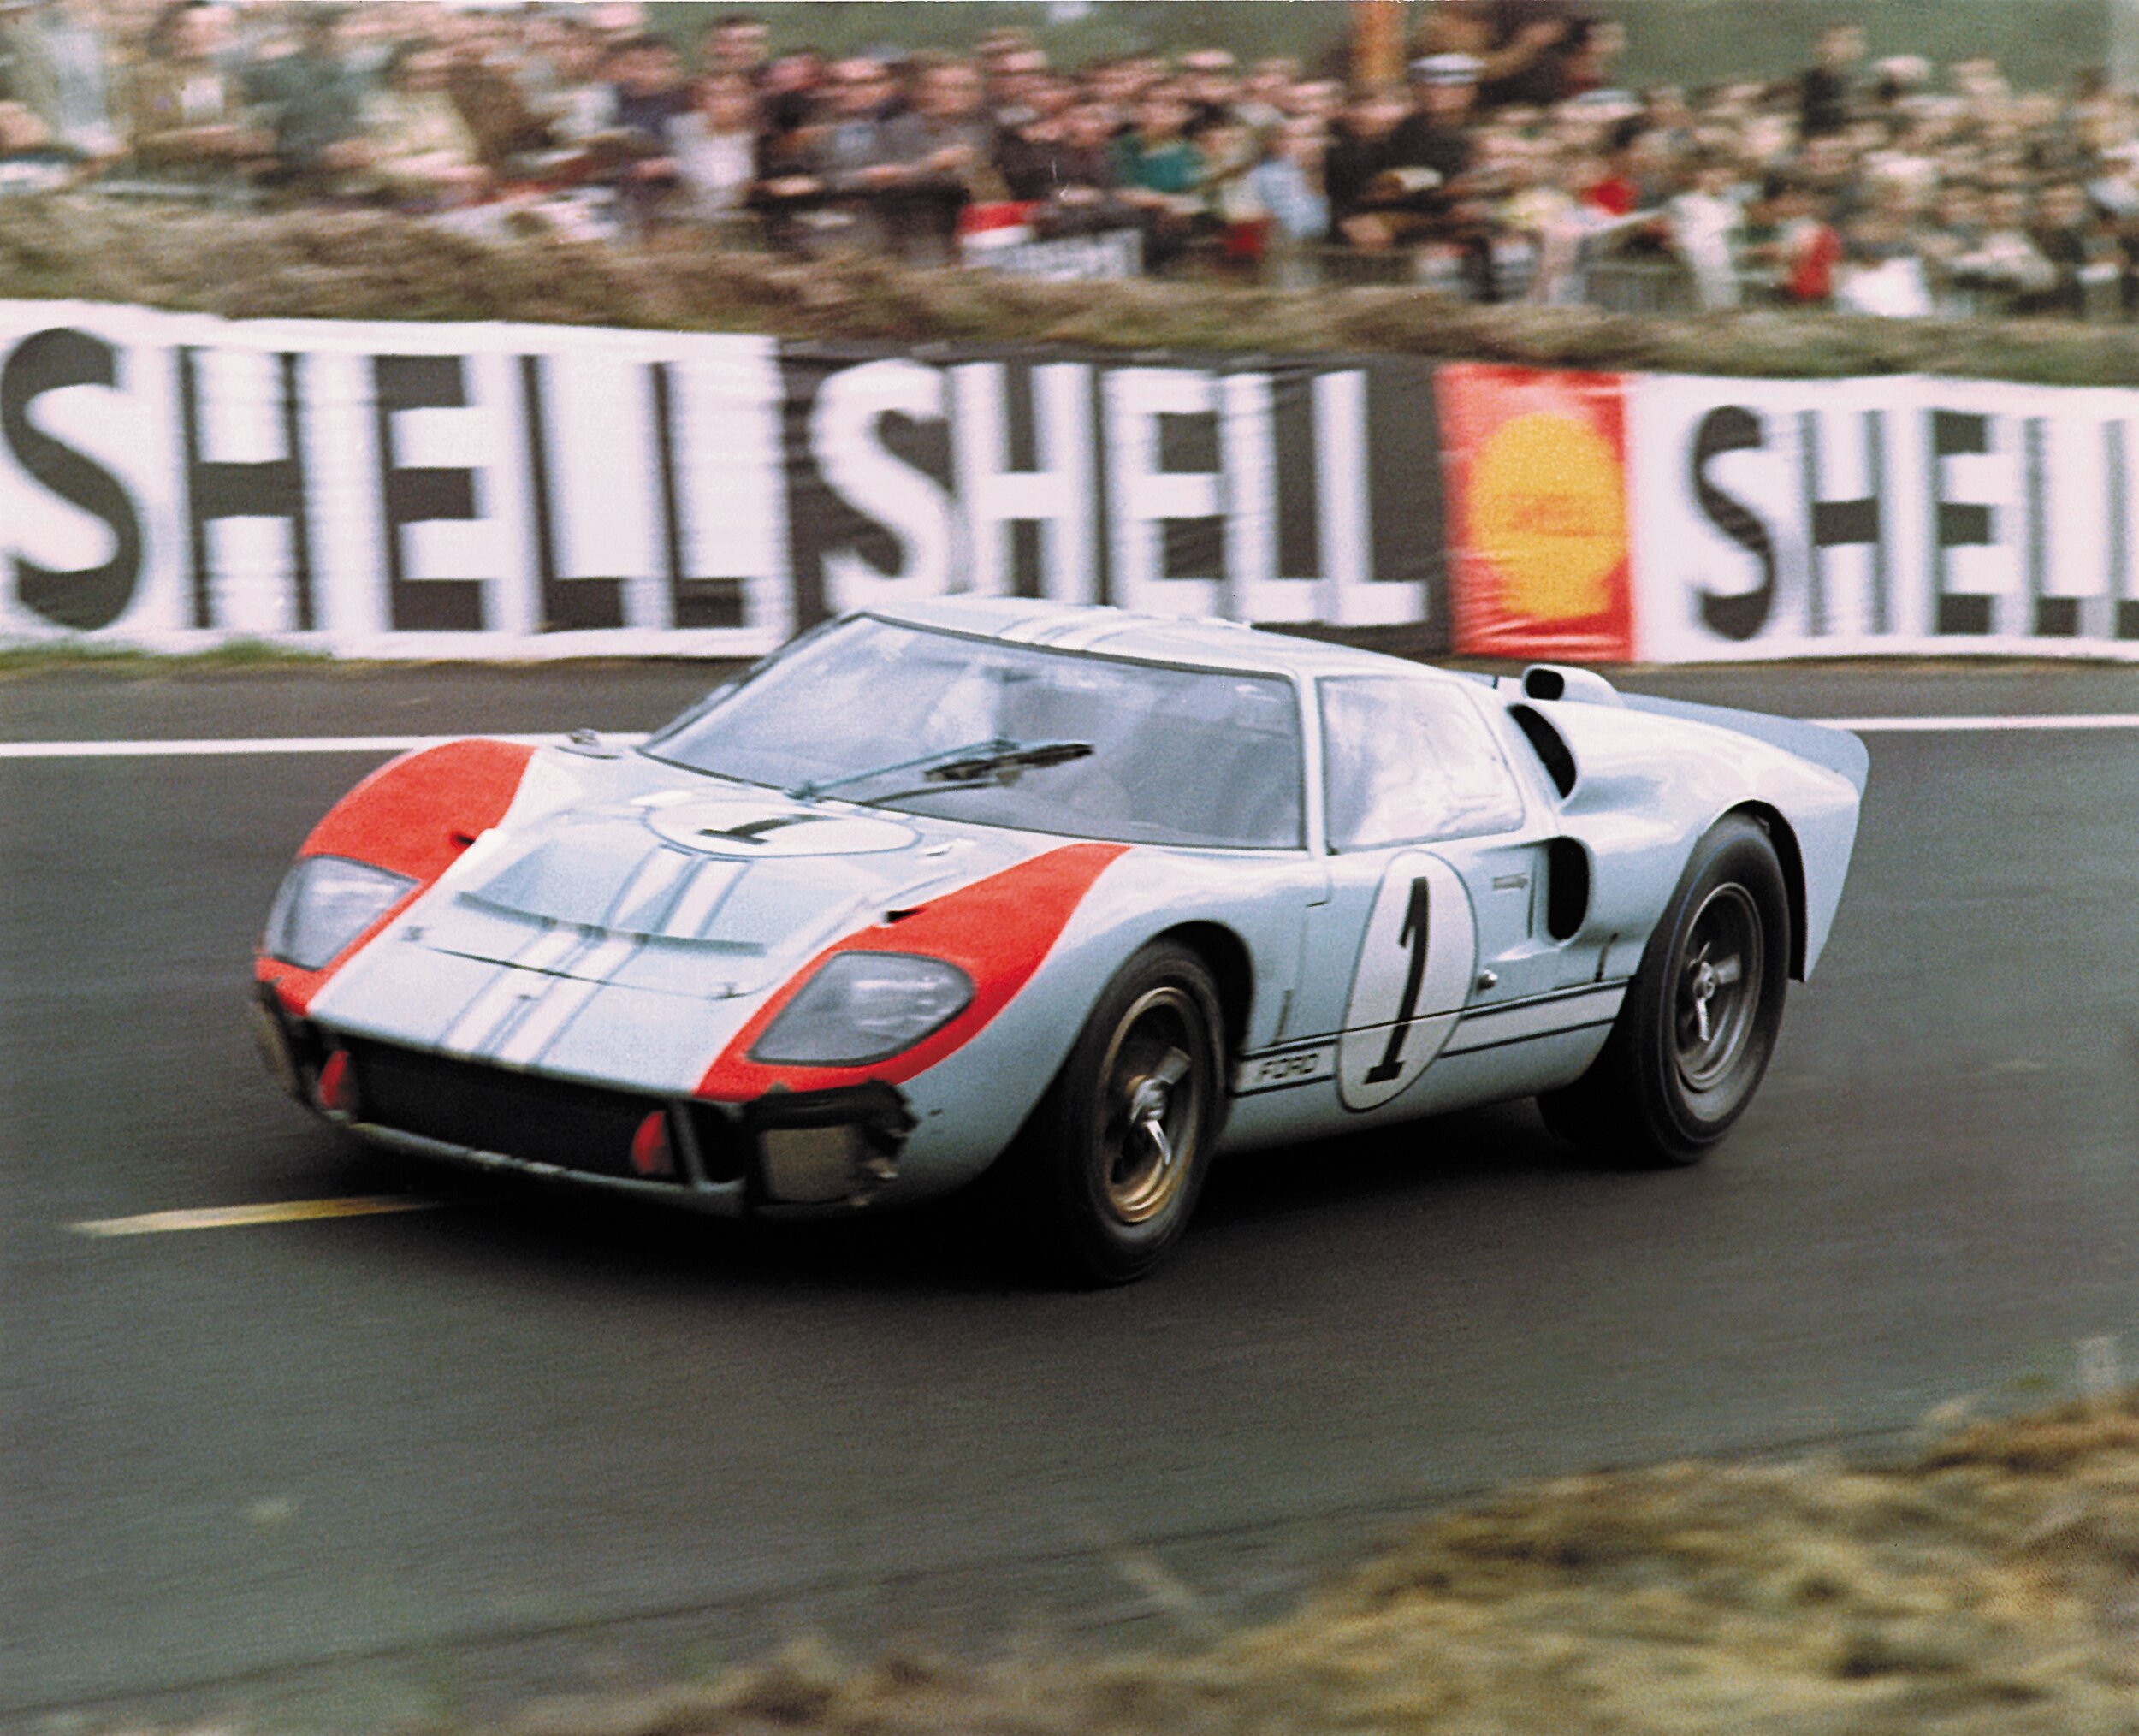 1966 Le Mans with Ford GT40 P/1015 driven by Ken Miles and Lloyd Ruby. Photo by Dave Friedman.